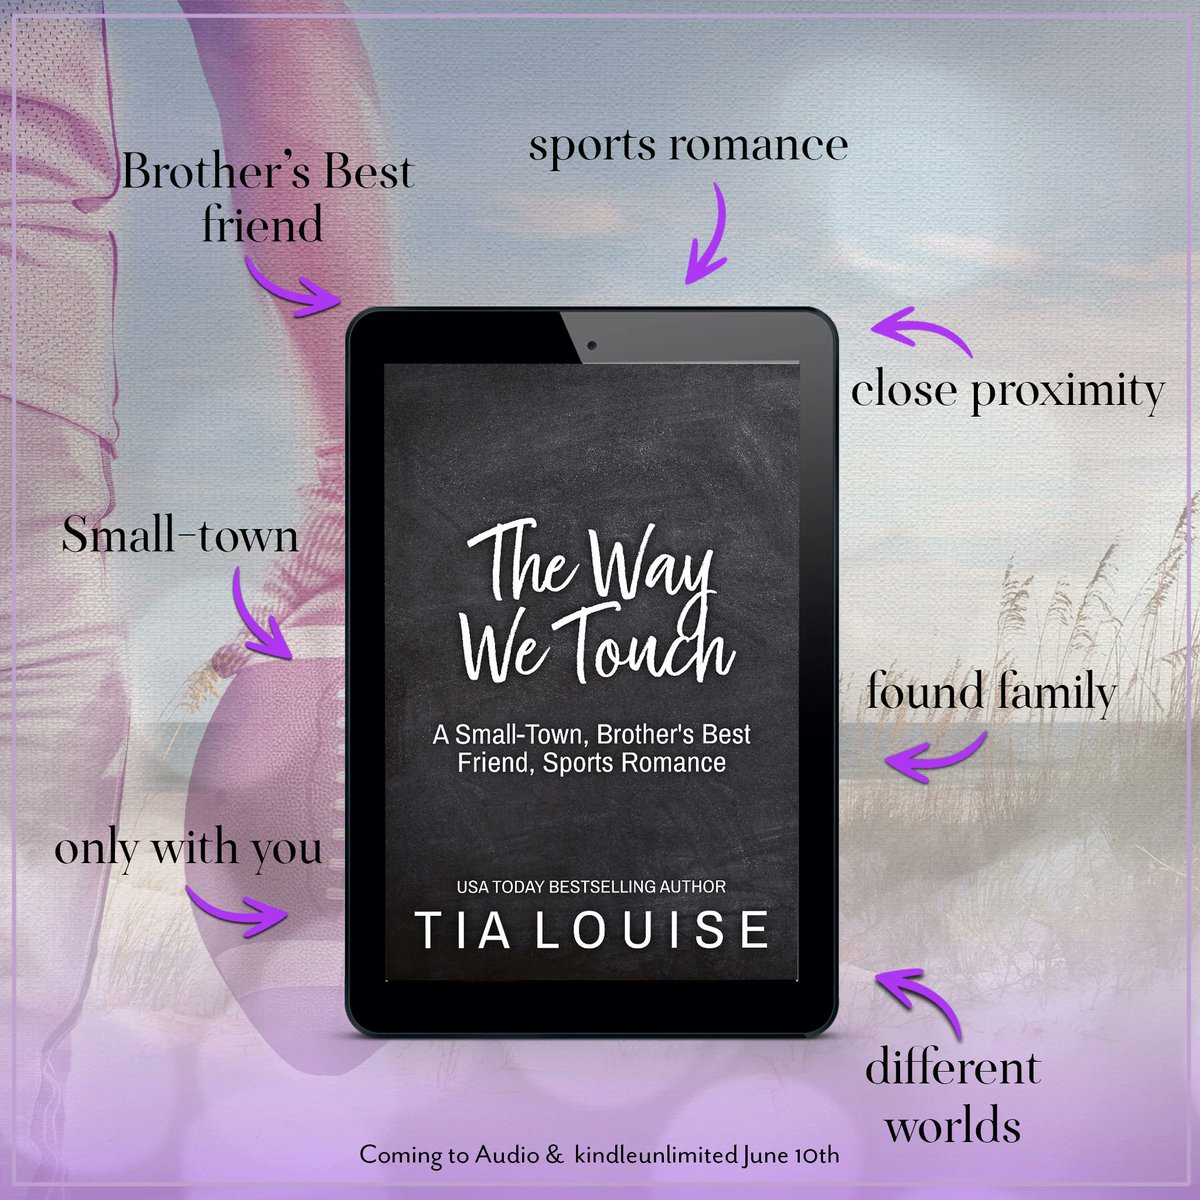 ✨TEASER: THE WAY WE TOUCH by @AuthorTLouise is coming June 10!
#PreOrderHere: geni.us/TWWTamz

#bookteaser #comingsoon #smalltownromance #sportsromance #tialouise #closeproximity #bookstagram #booktok #romancebooks #spicyromance #brothersbestfriend @theauthoragency